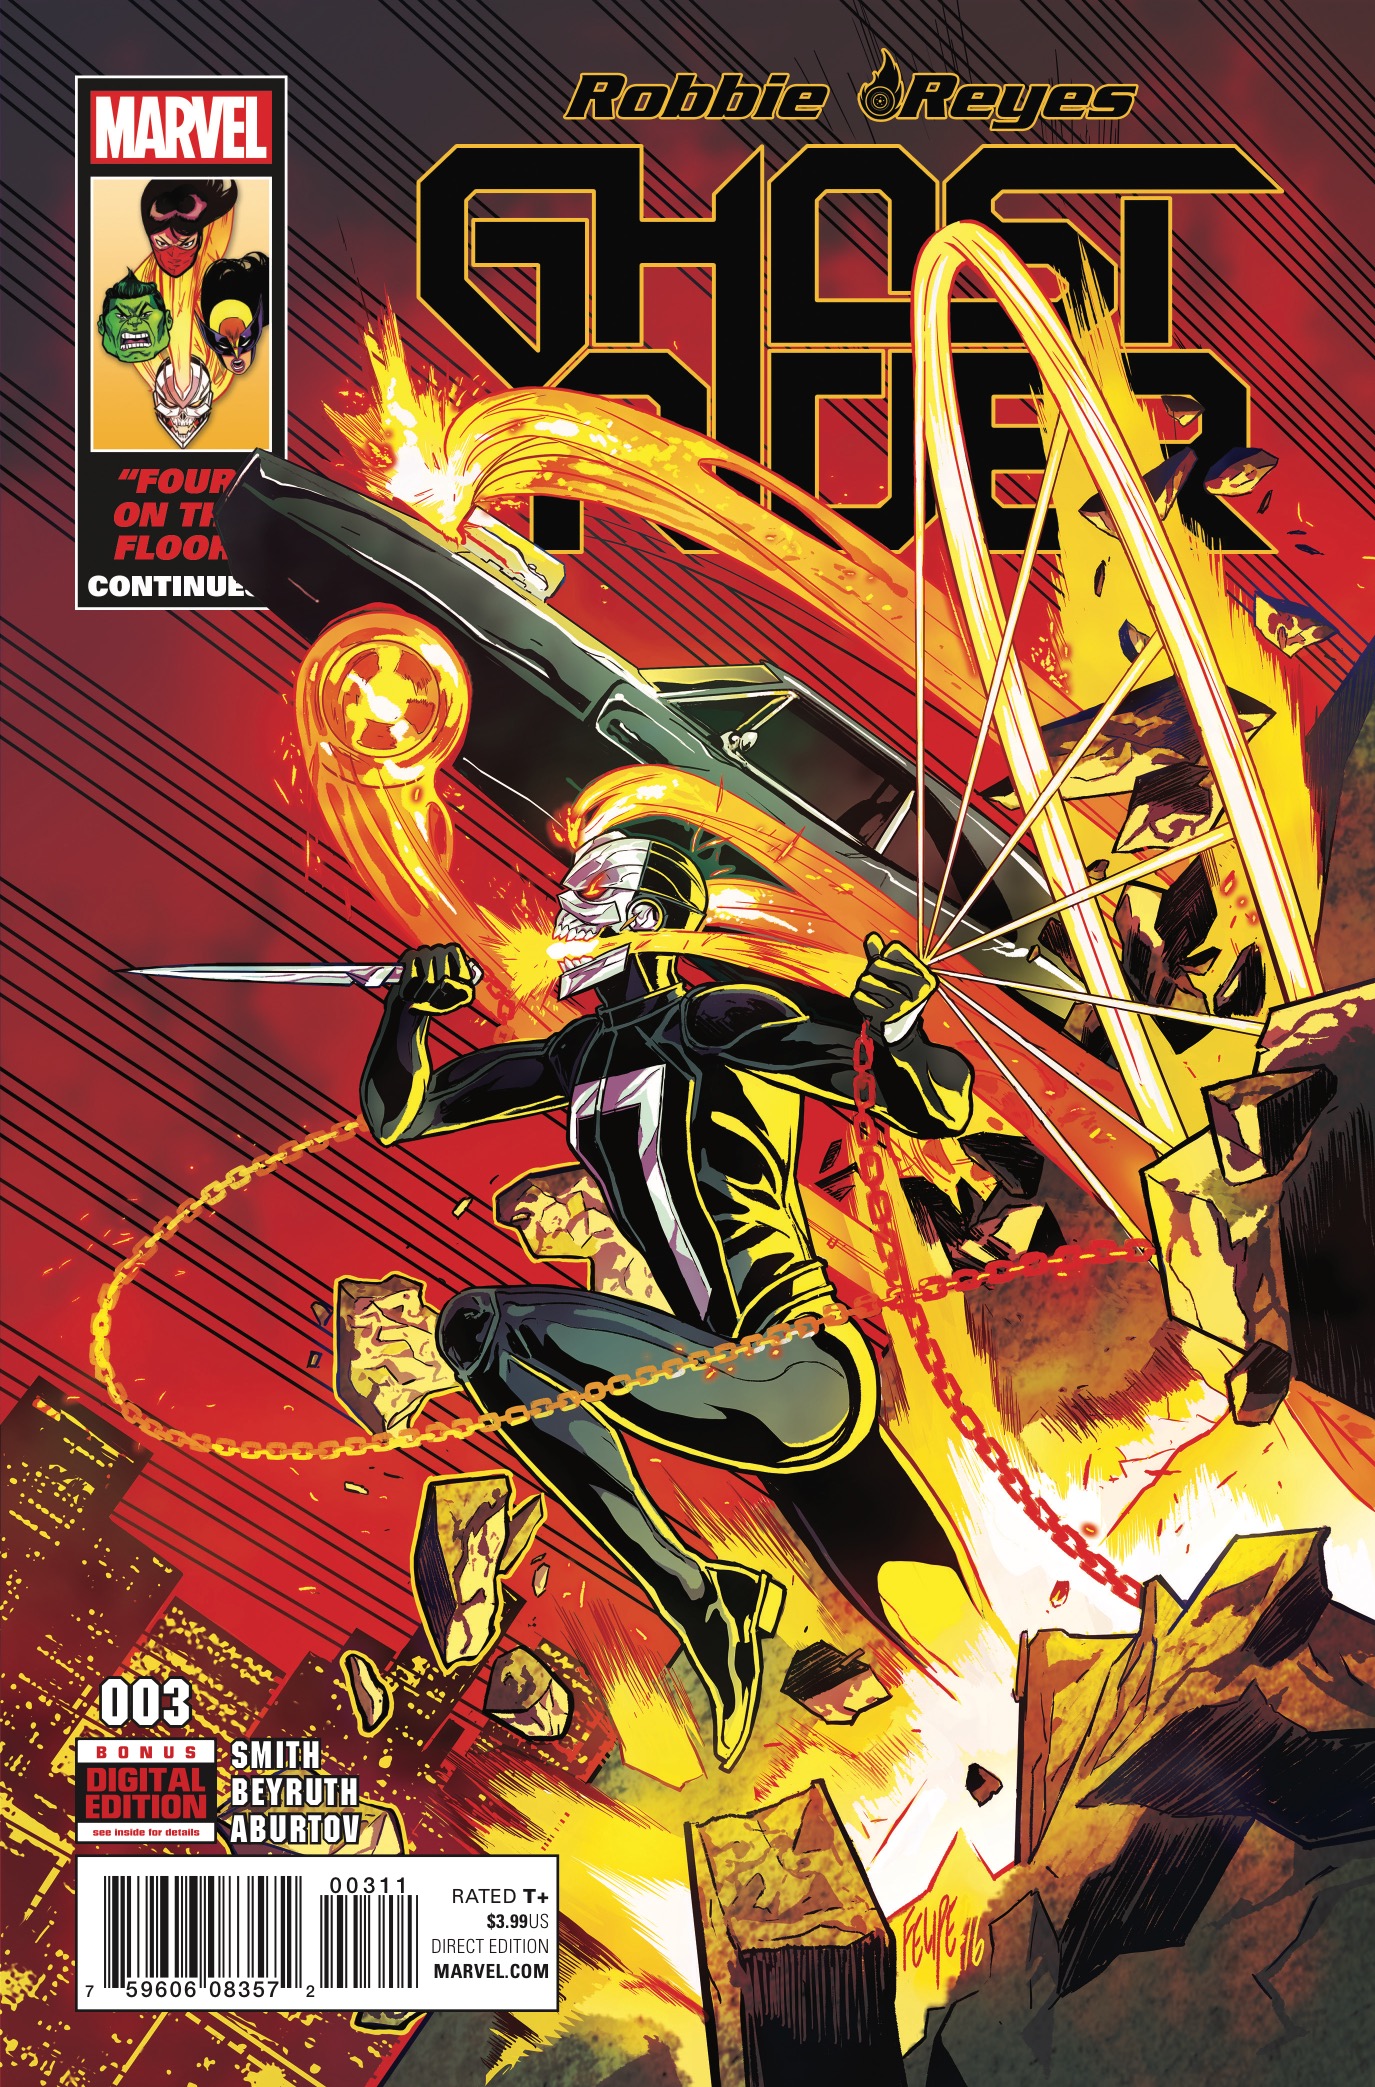 Marvel Preview: Ghost Rider #3